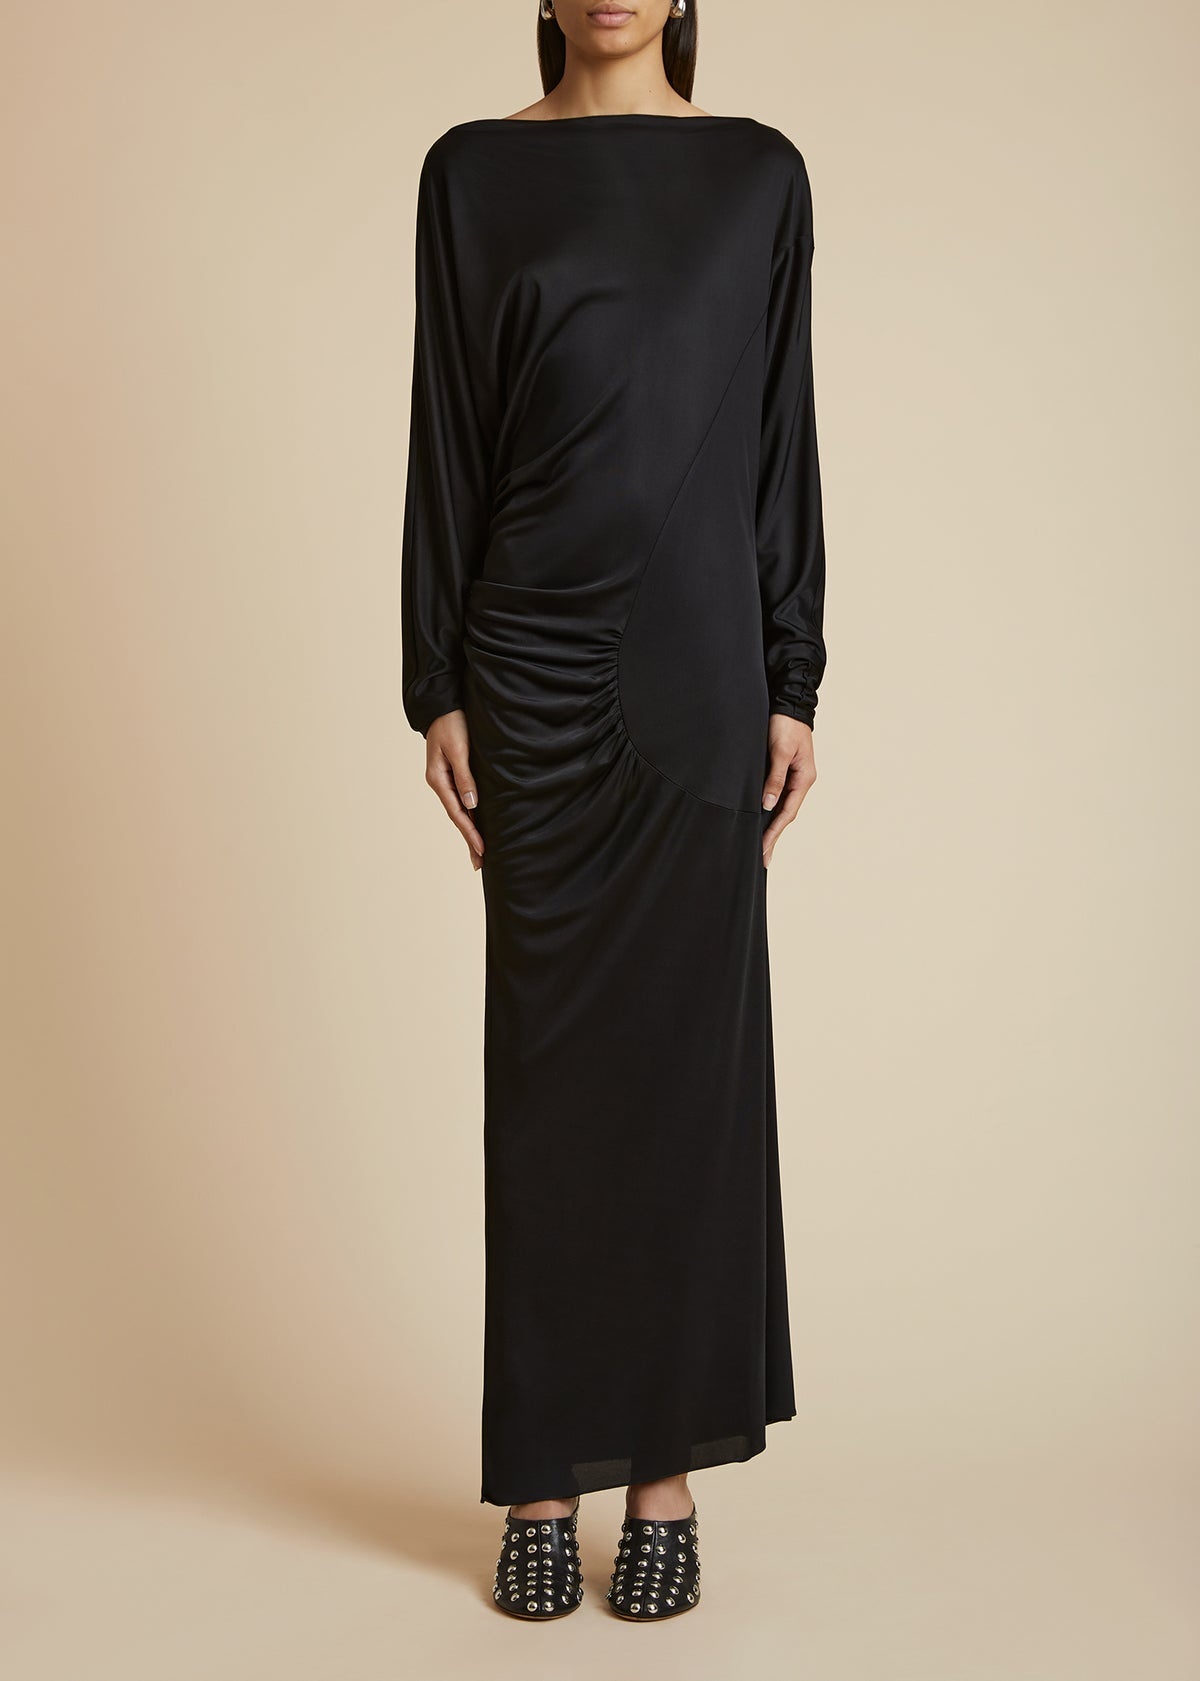 The Oron Dress in Black - 2